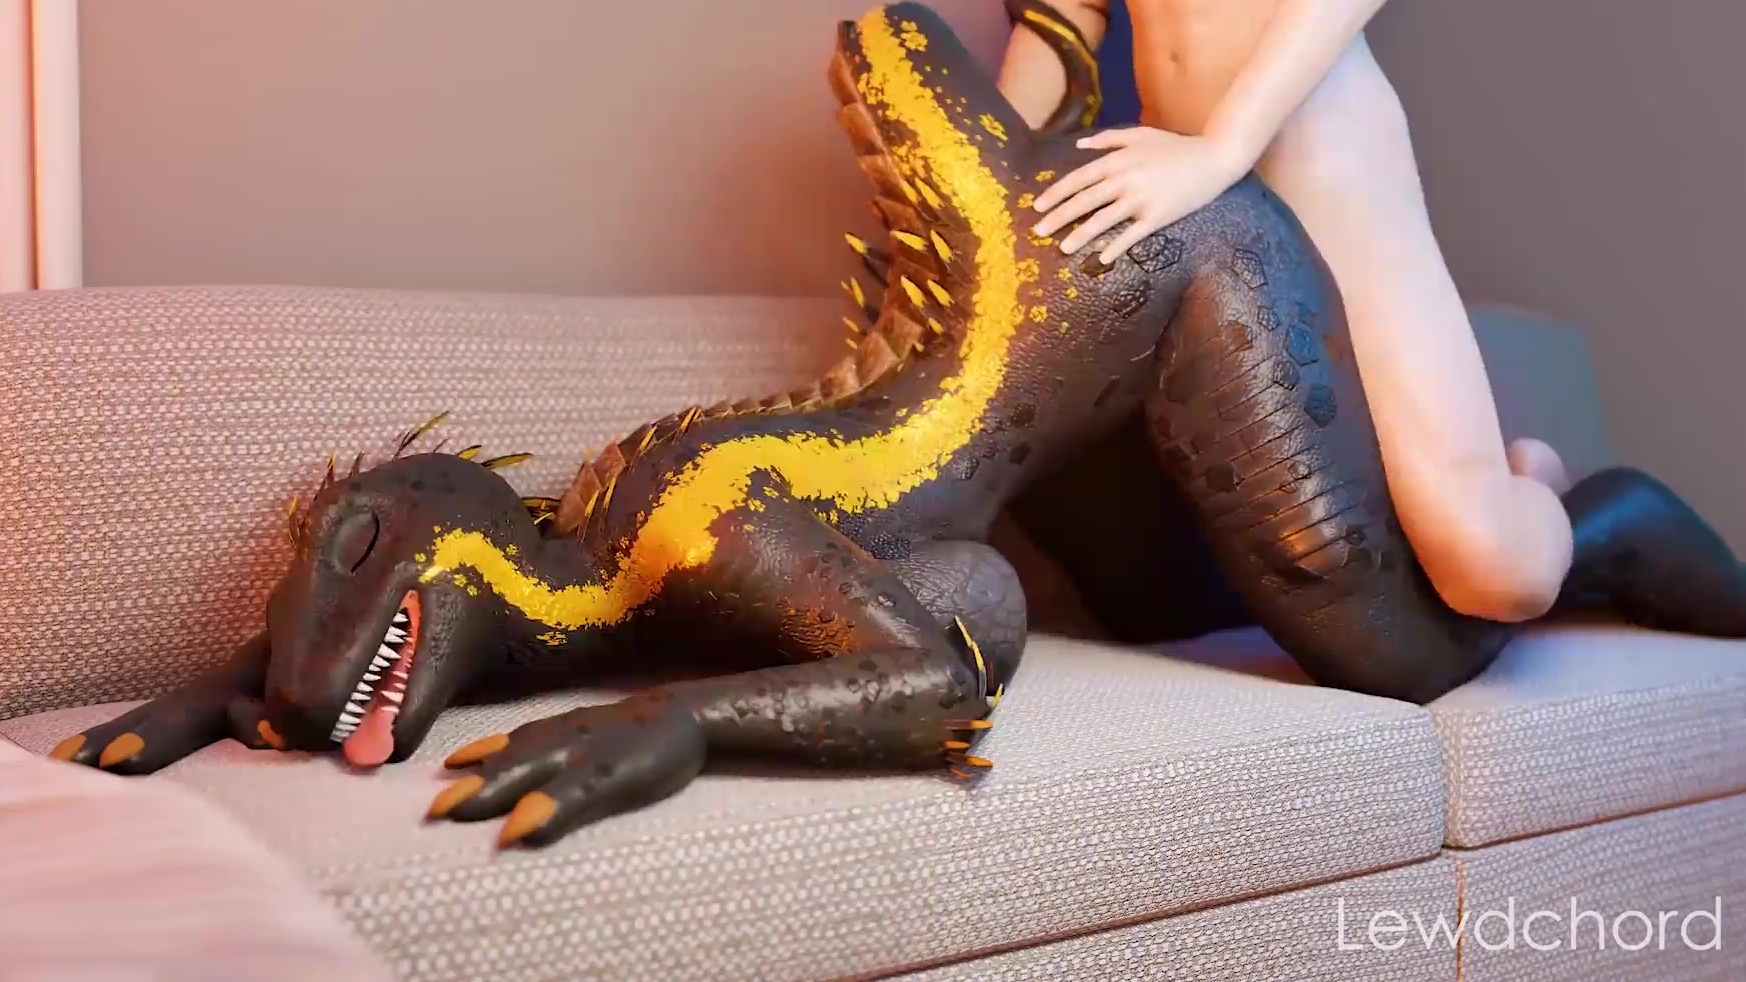 3d Reptile - Hot 3D Furry Porn: Sexy Busty Lizard-girl Gets Doggy-fucked By a Man On the  Sofa